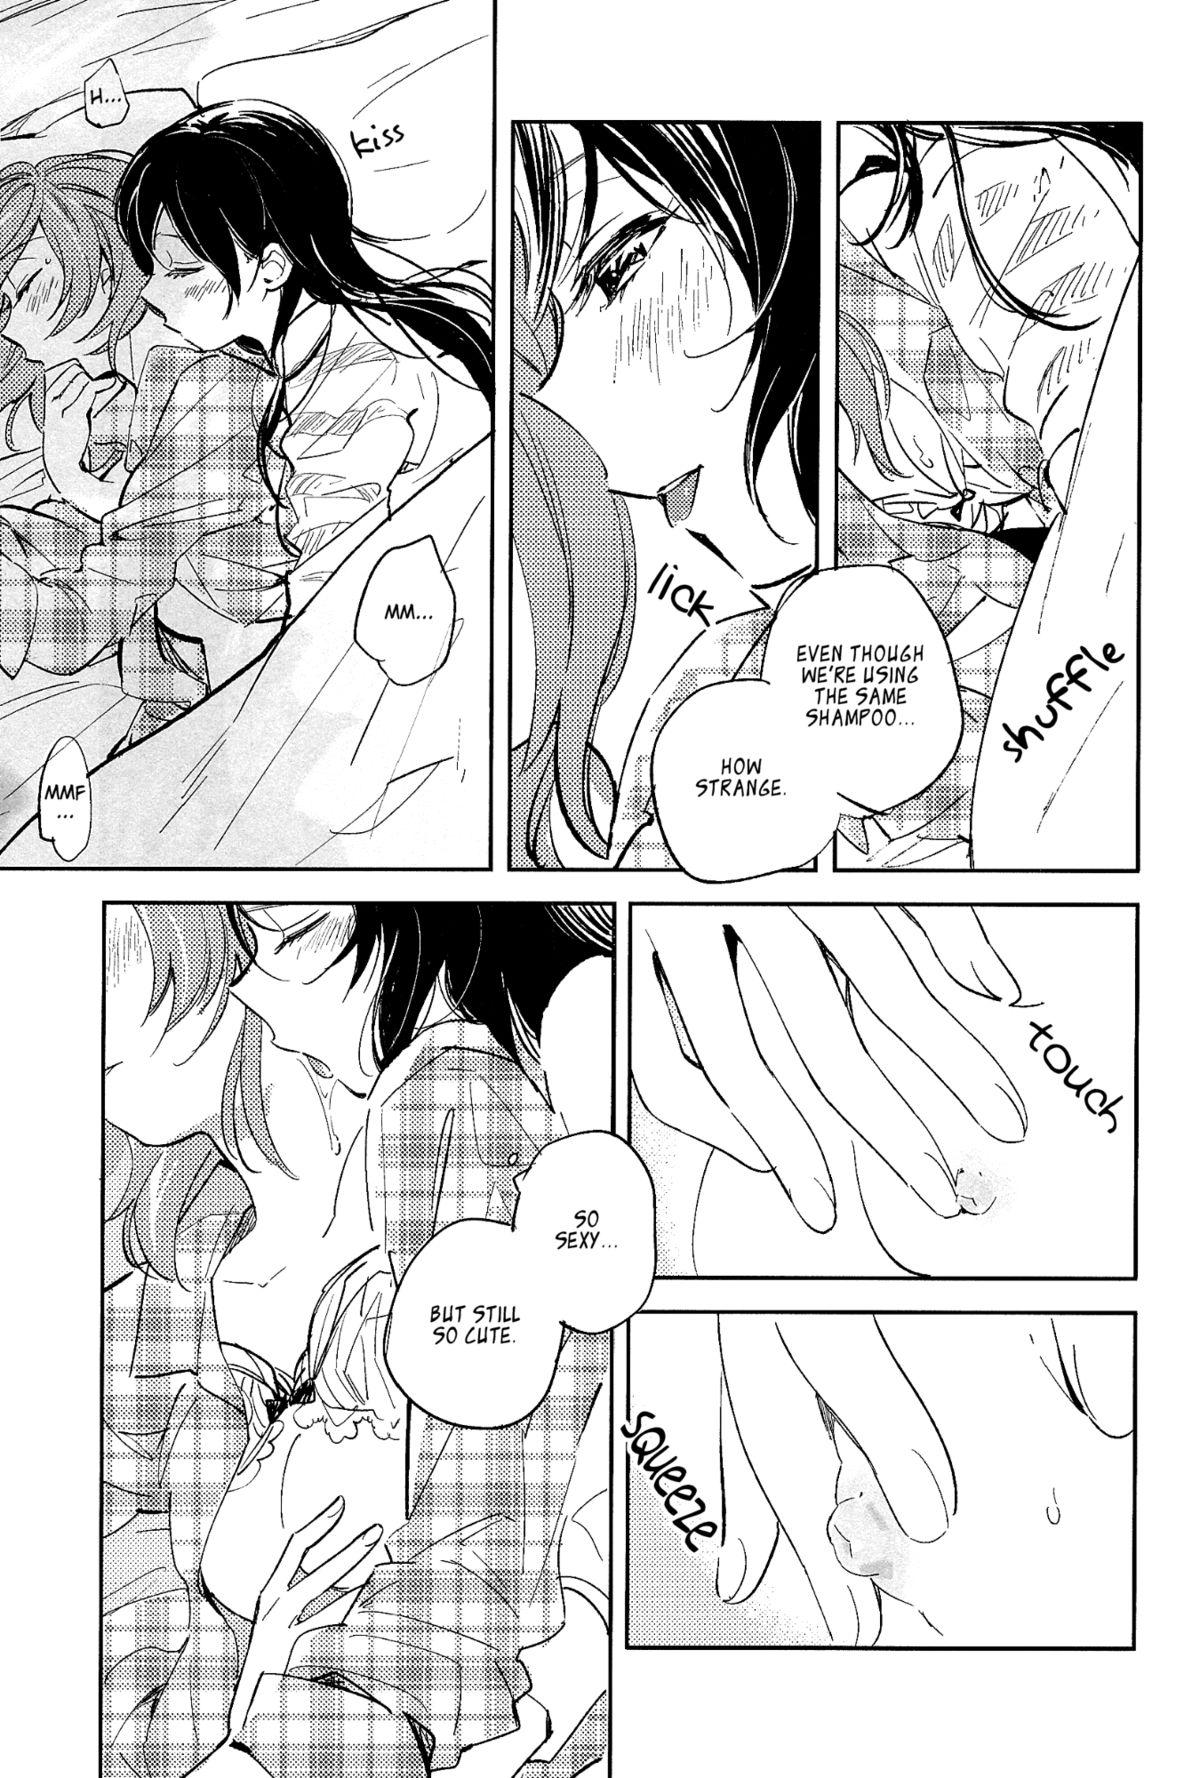 Screaming Koibito no Jikan | Time for Lovers - Love live Amateur Teen - Page 7